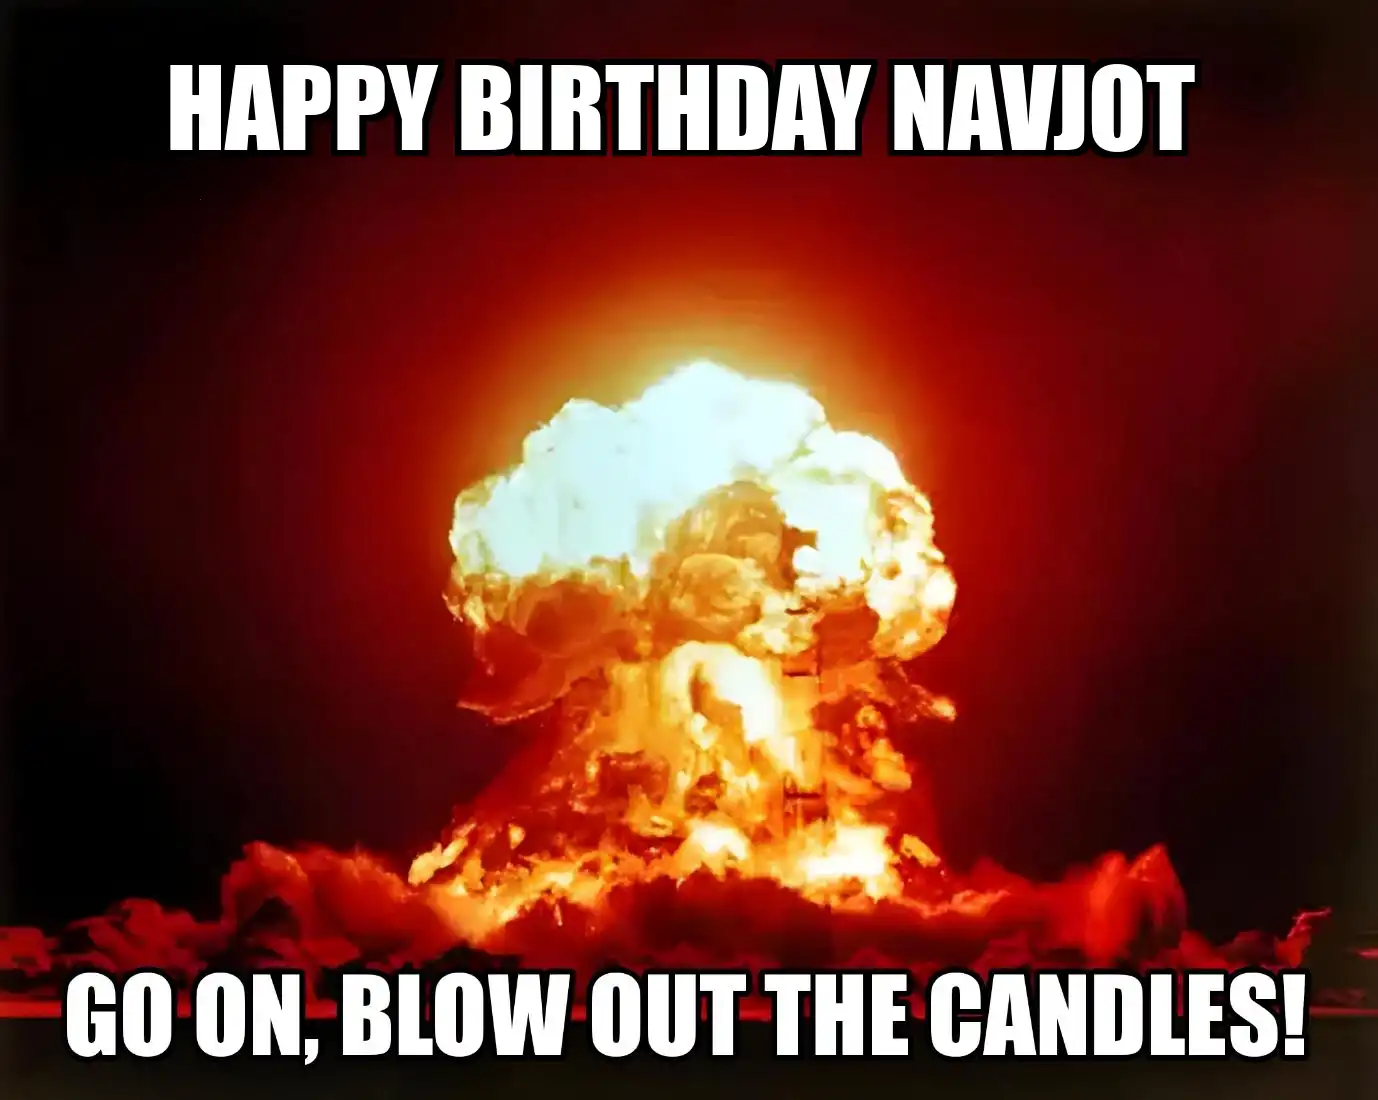 Happy Birthday Navjot Go On Blow Out The Candles Meme